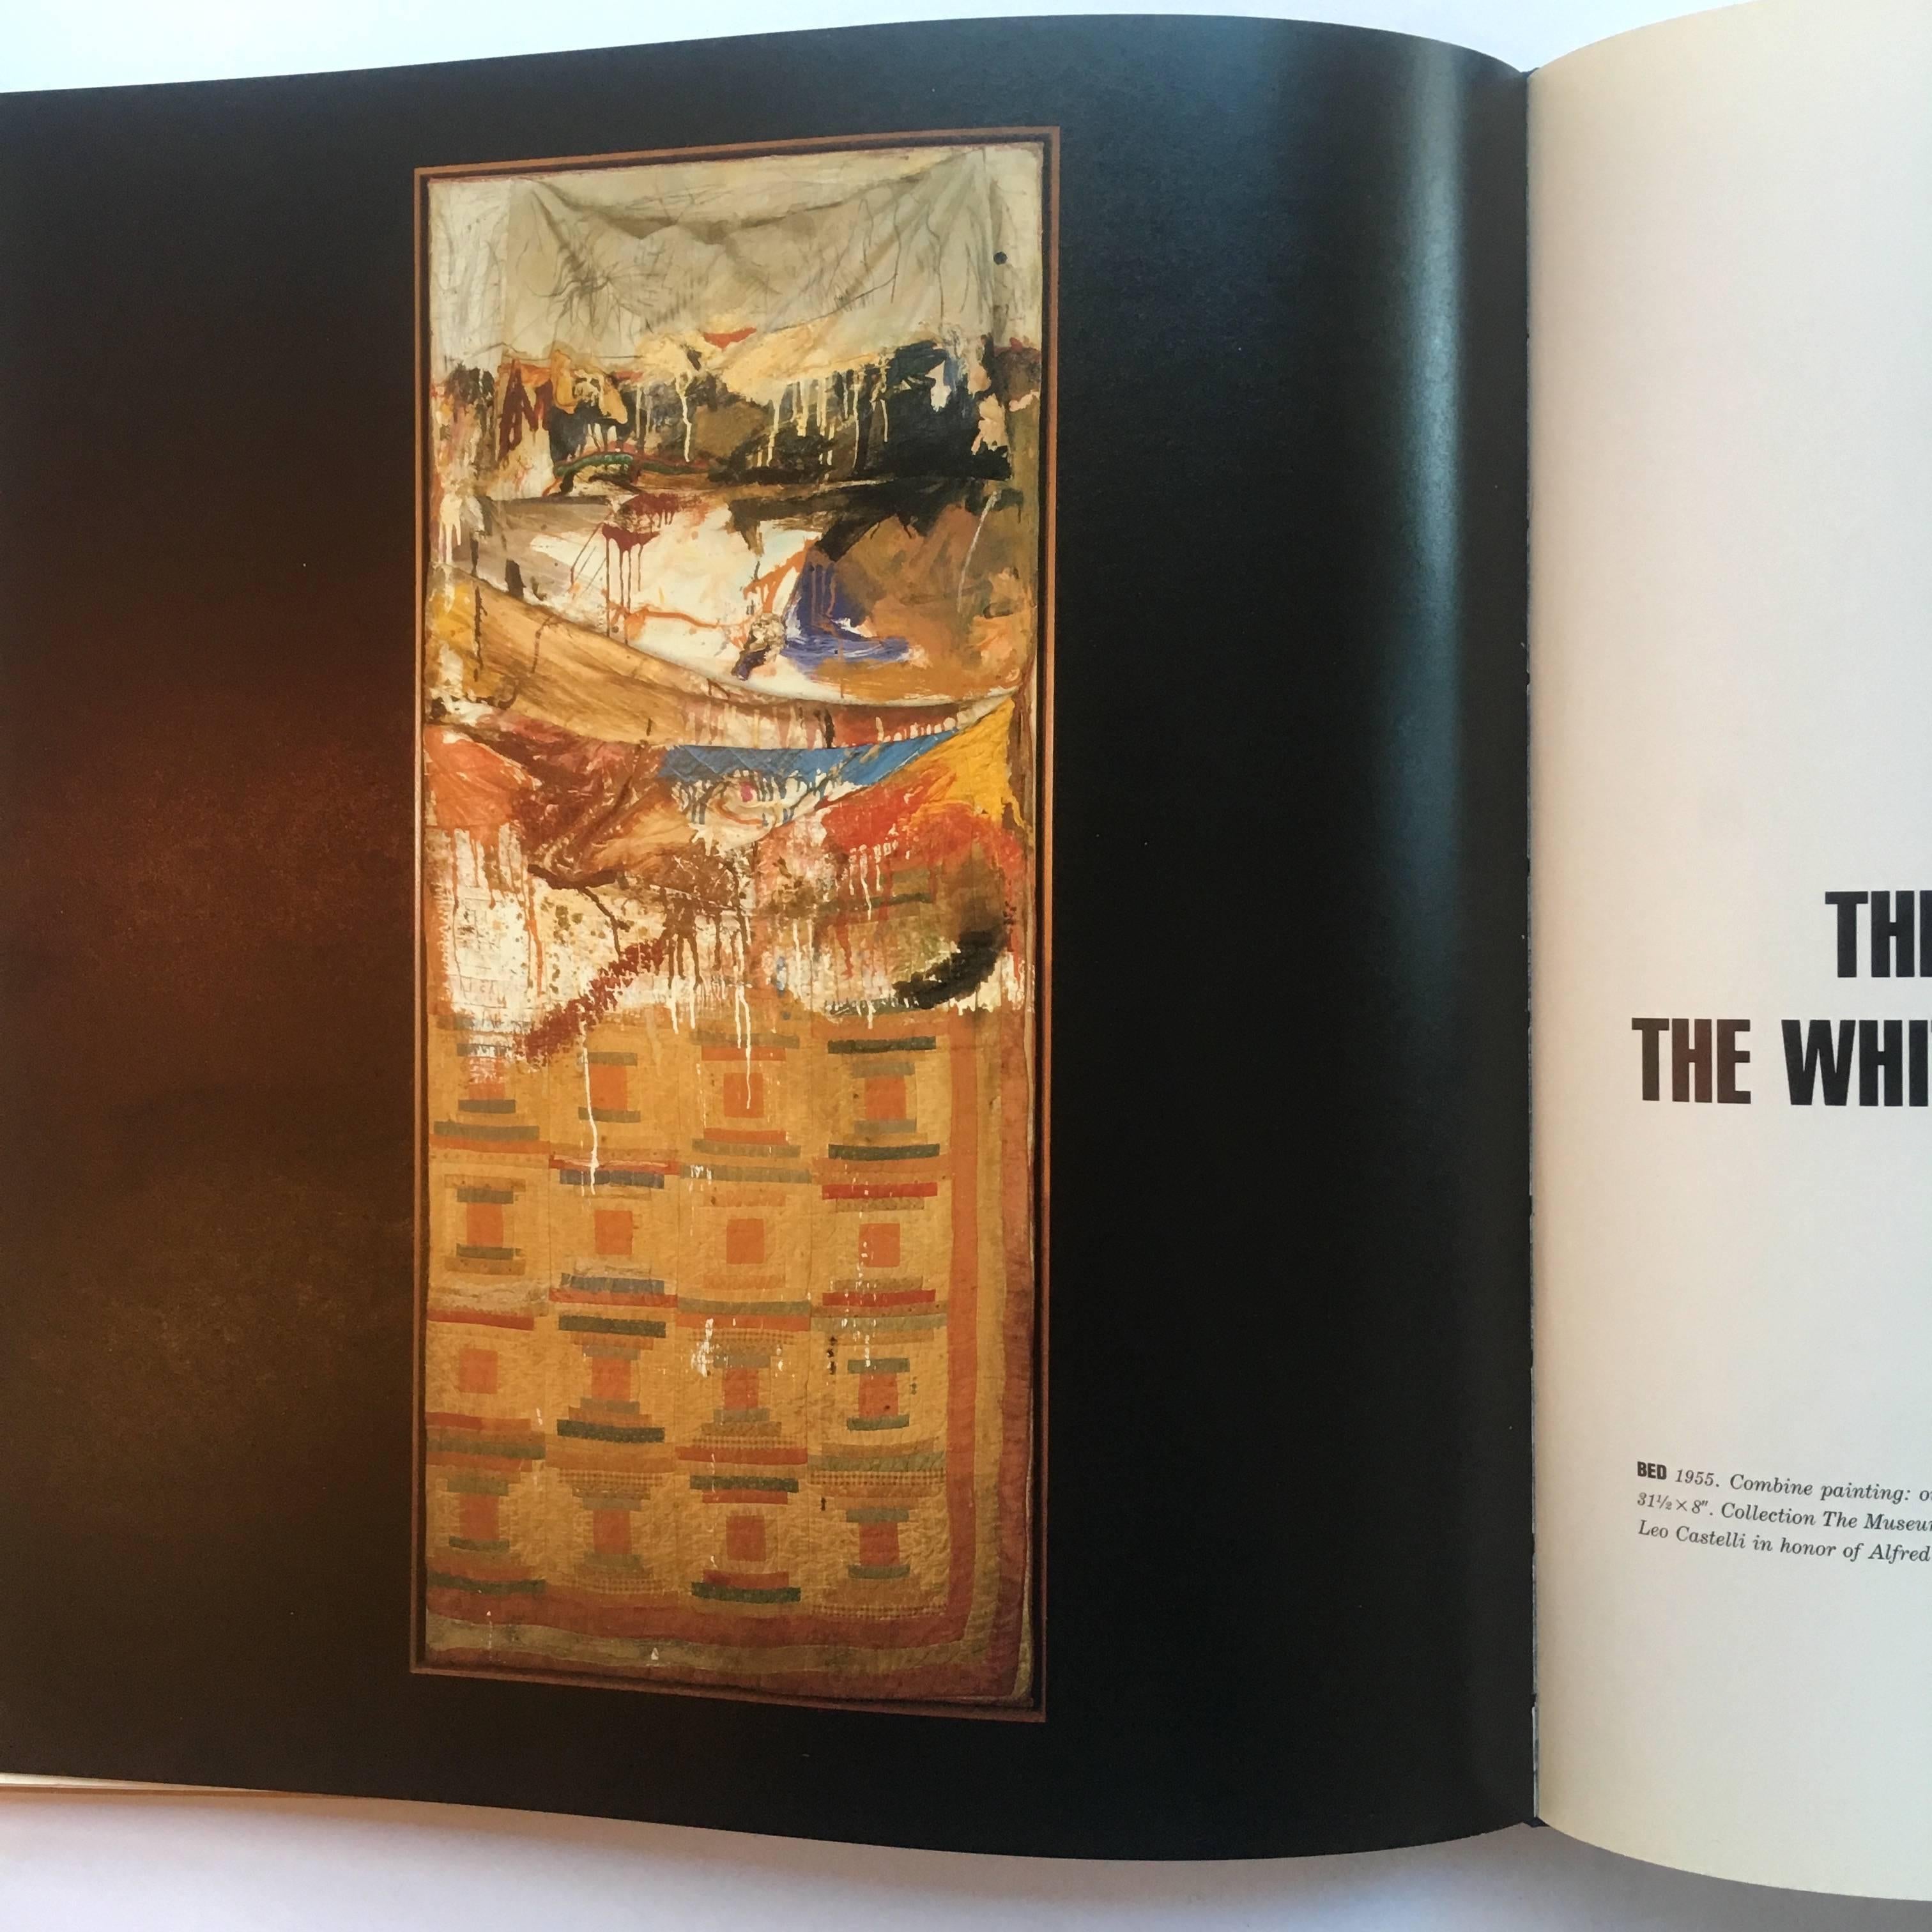 First edition, published by Harry N. Abrams, 1990.

An important book from best selling author Mary Lynn Kotz, created in collaboration with Robert Rauschenberg. This book is the complete account of the life of this iconic twentieth century